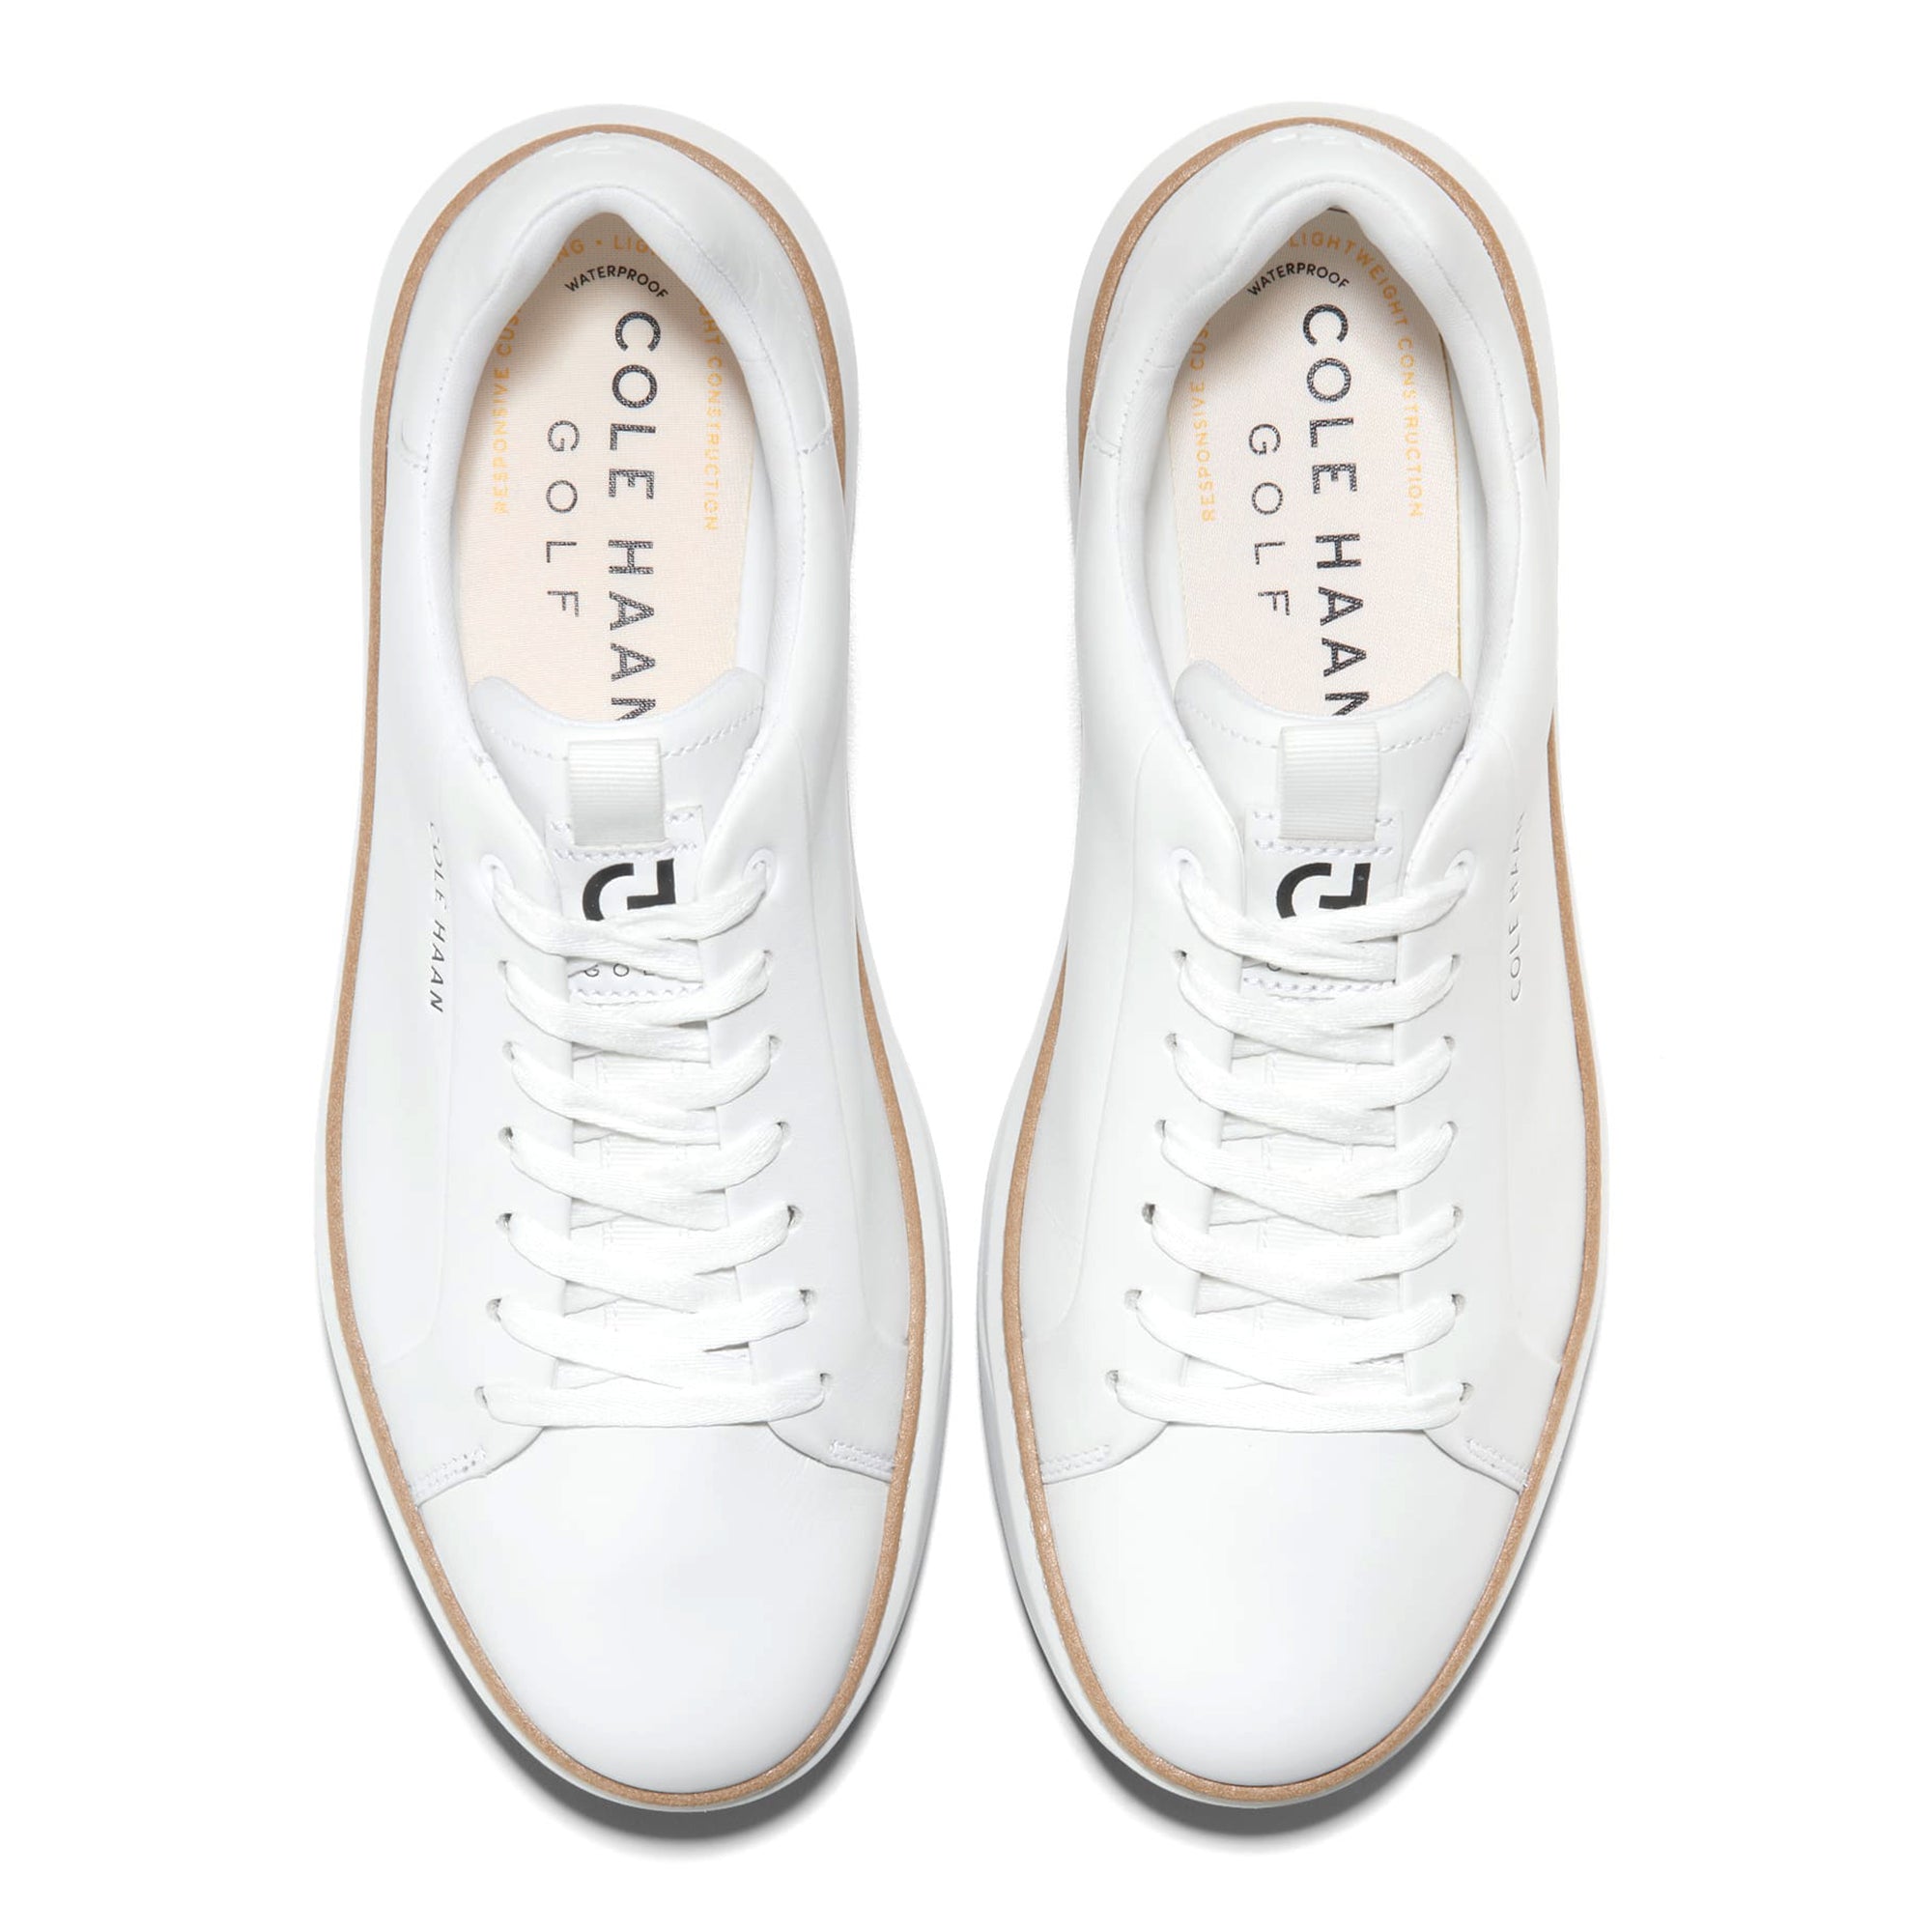 cole-haan-grandpro-topspin-golf-shoes-c38503-optic-white-natural